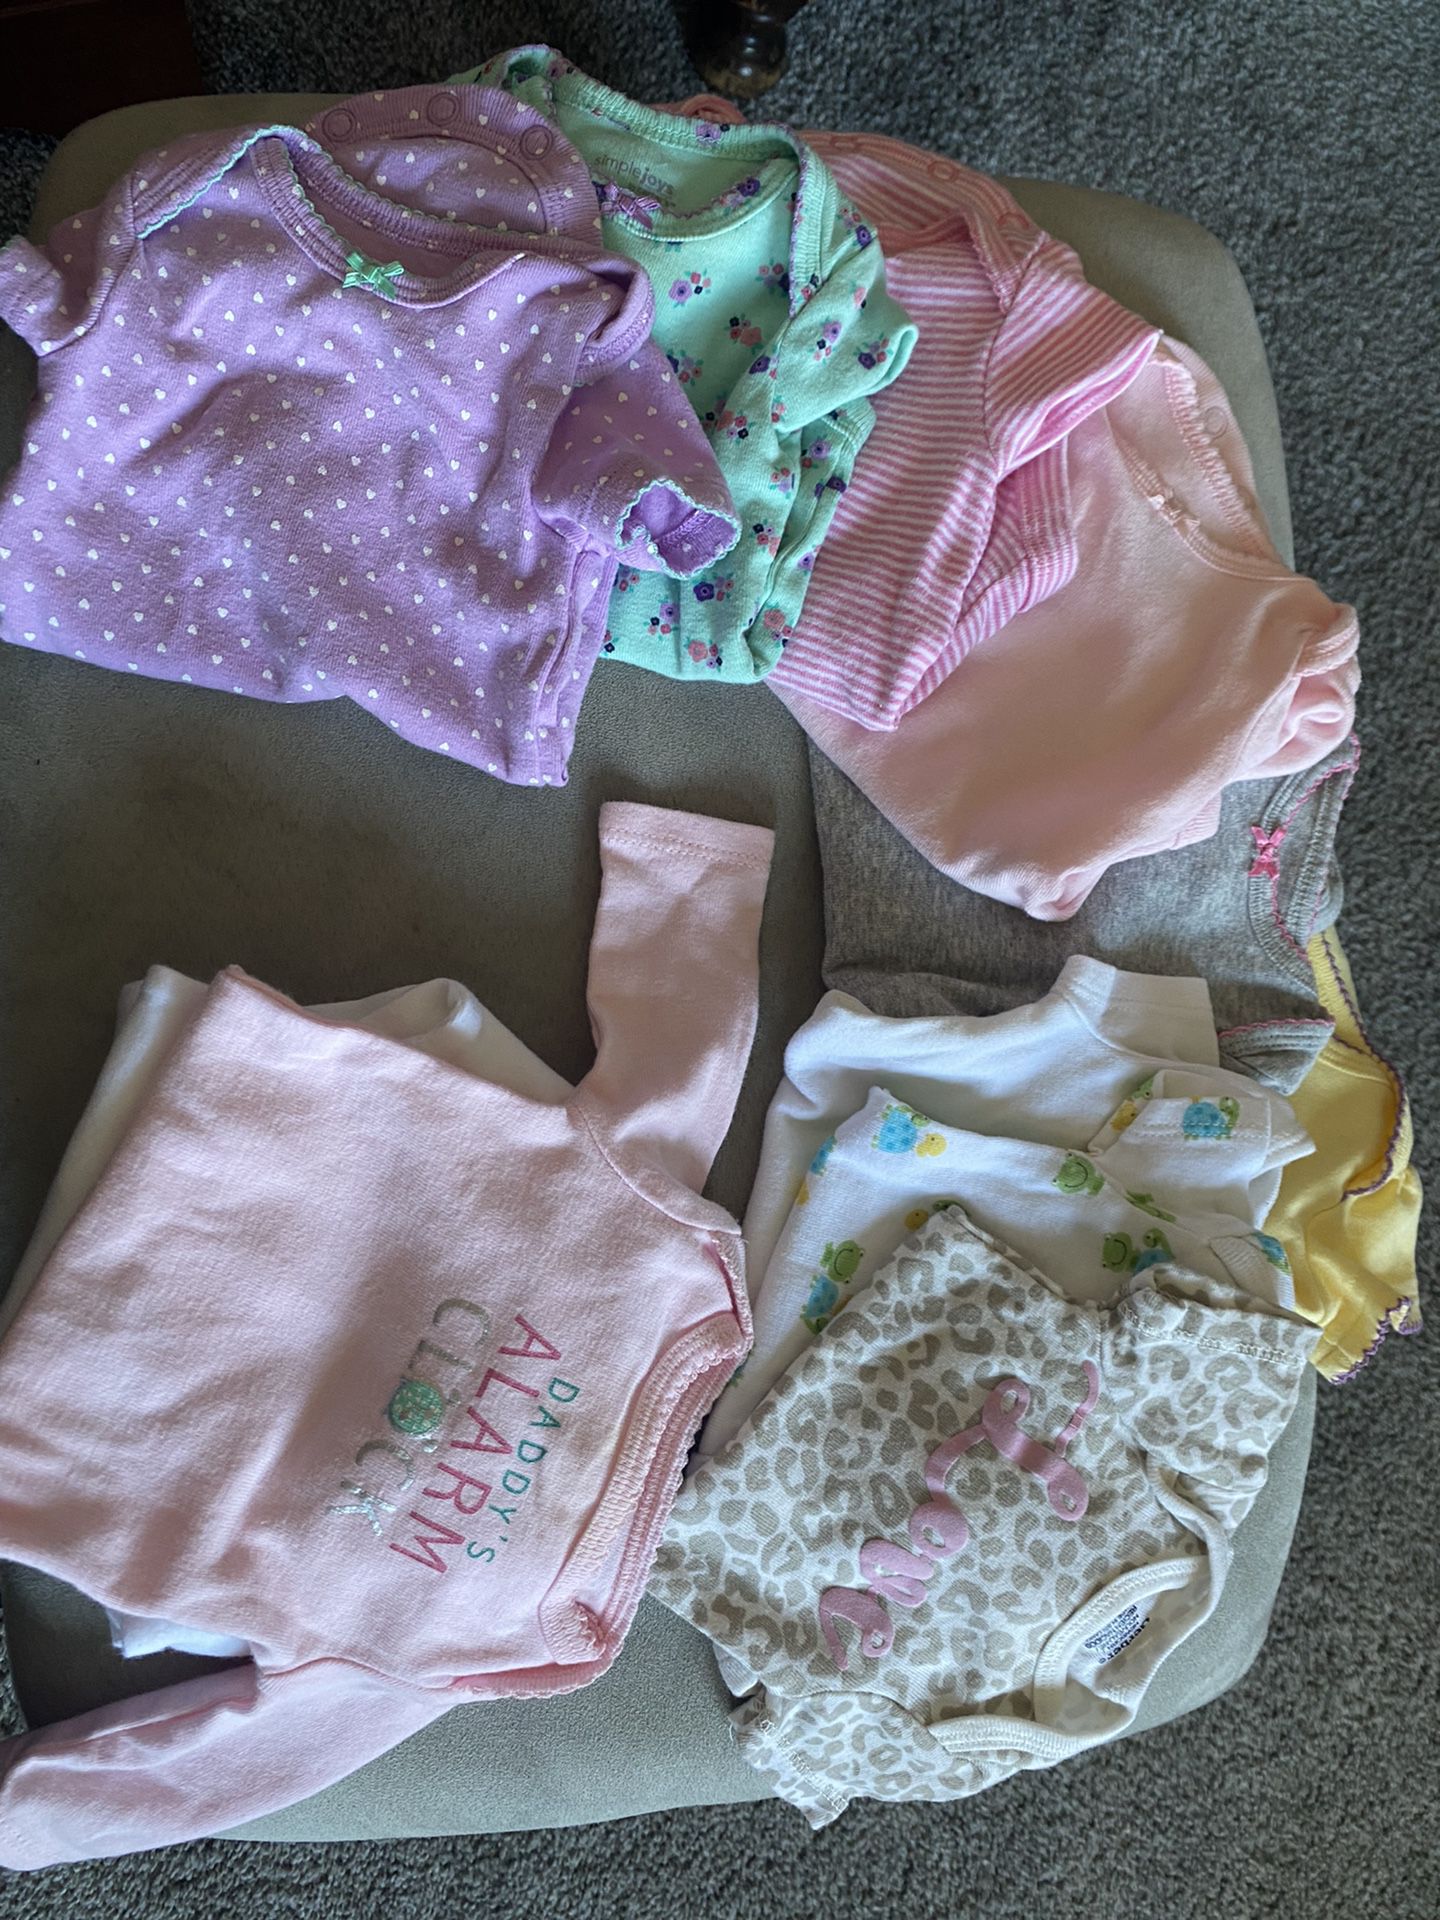 Newborn Outfits  Pajamas Onesies And Mittens And  Slippers 